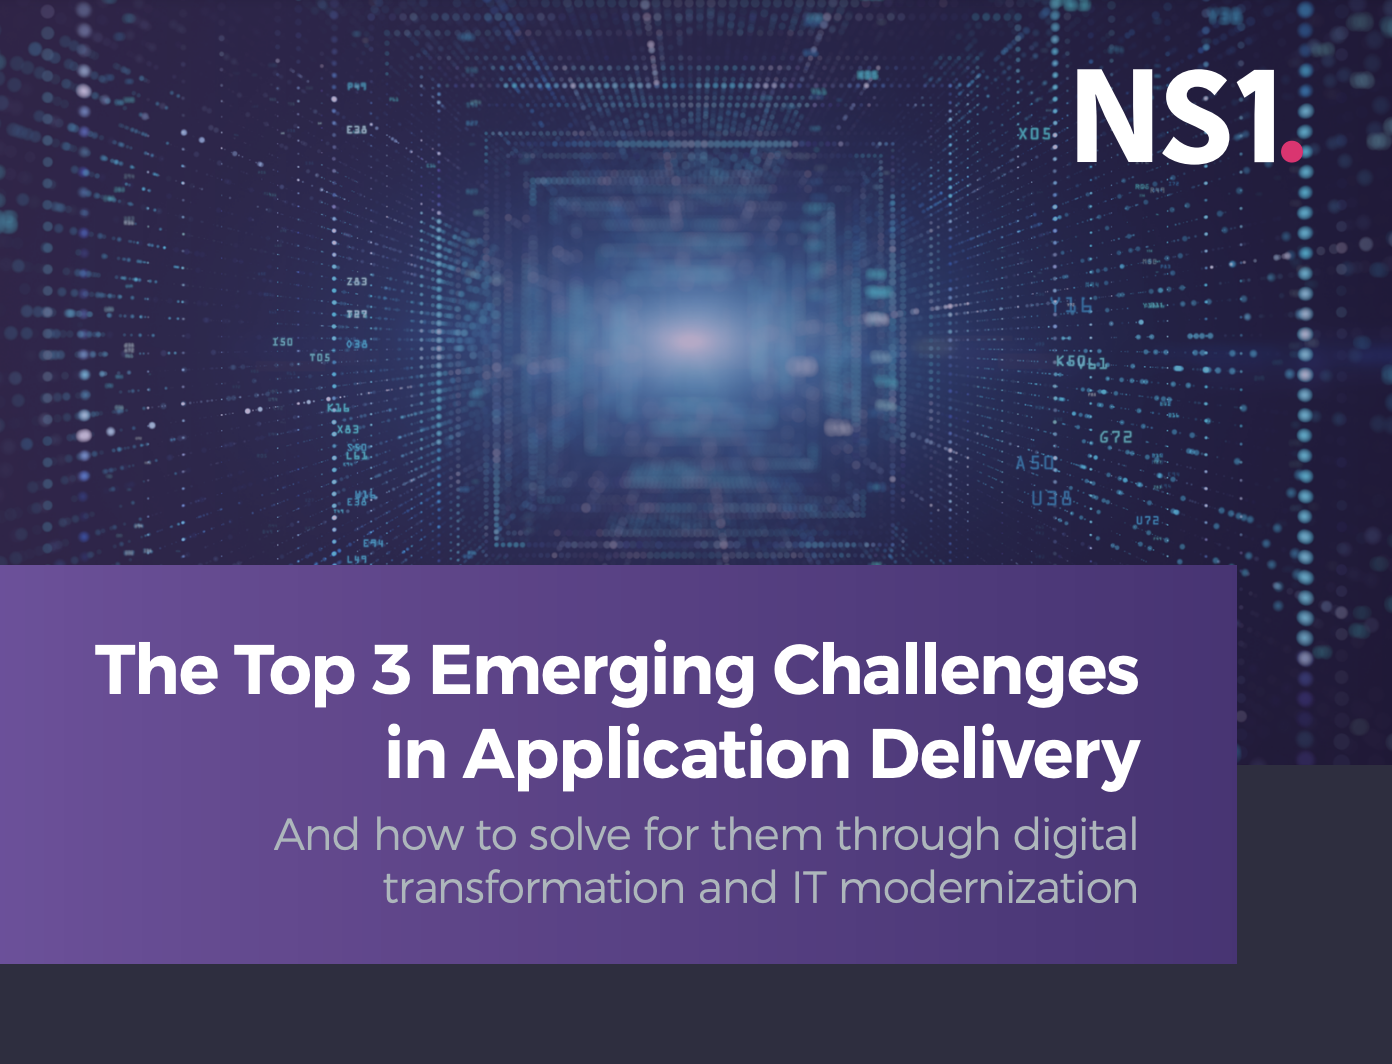 The Top 3 Emerging Challenges in Application Delivery